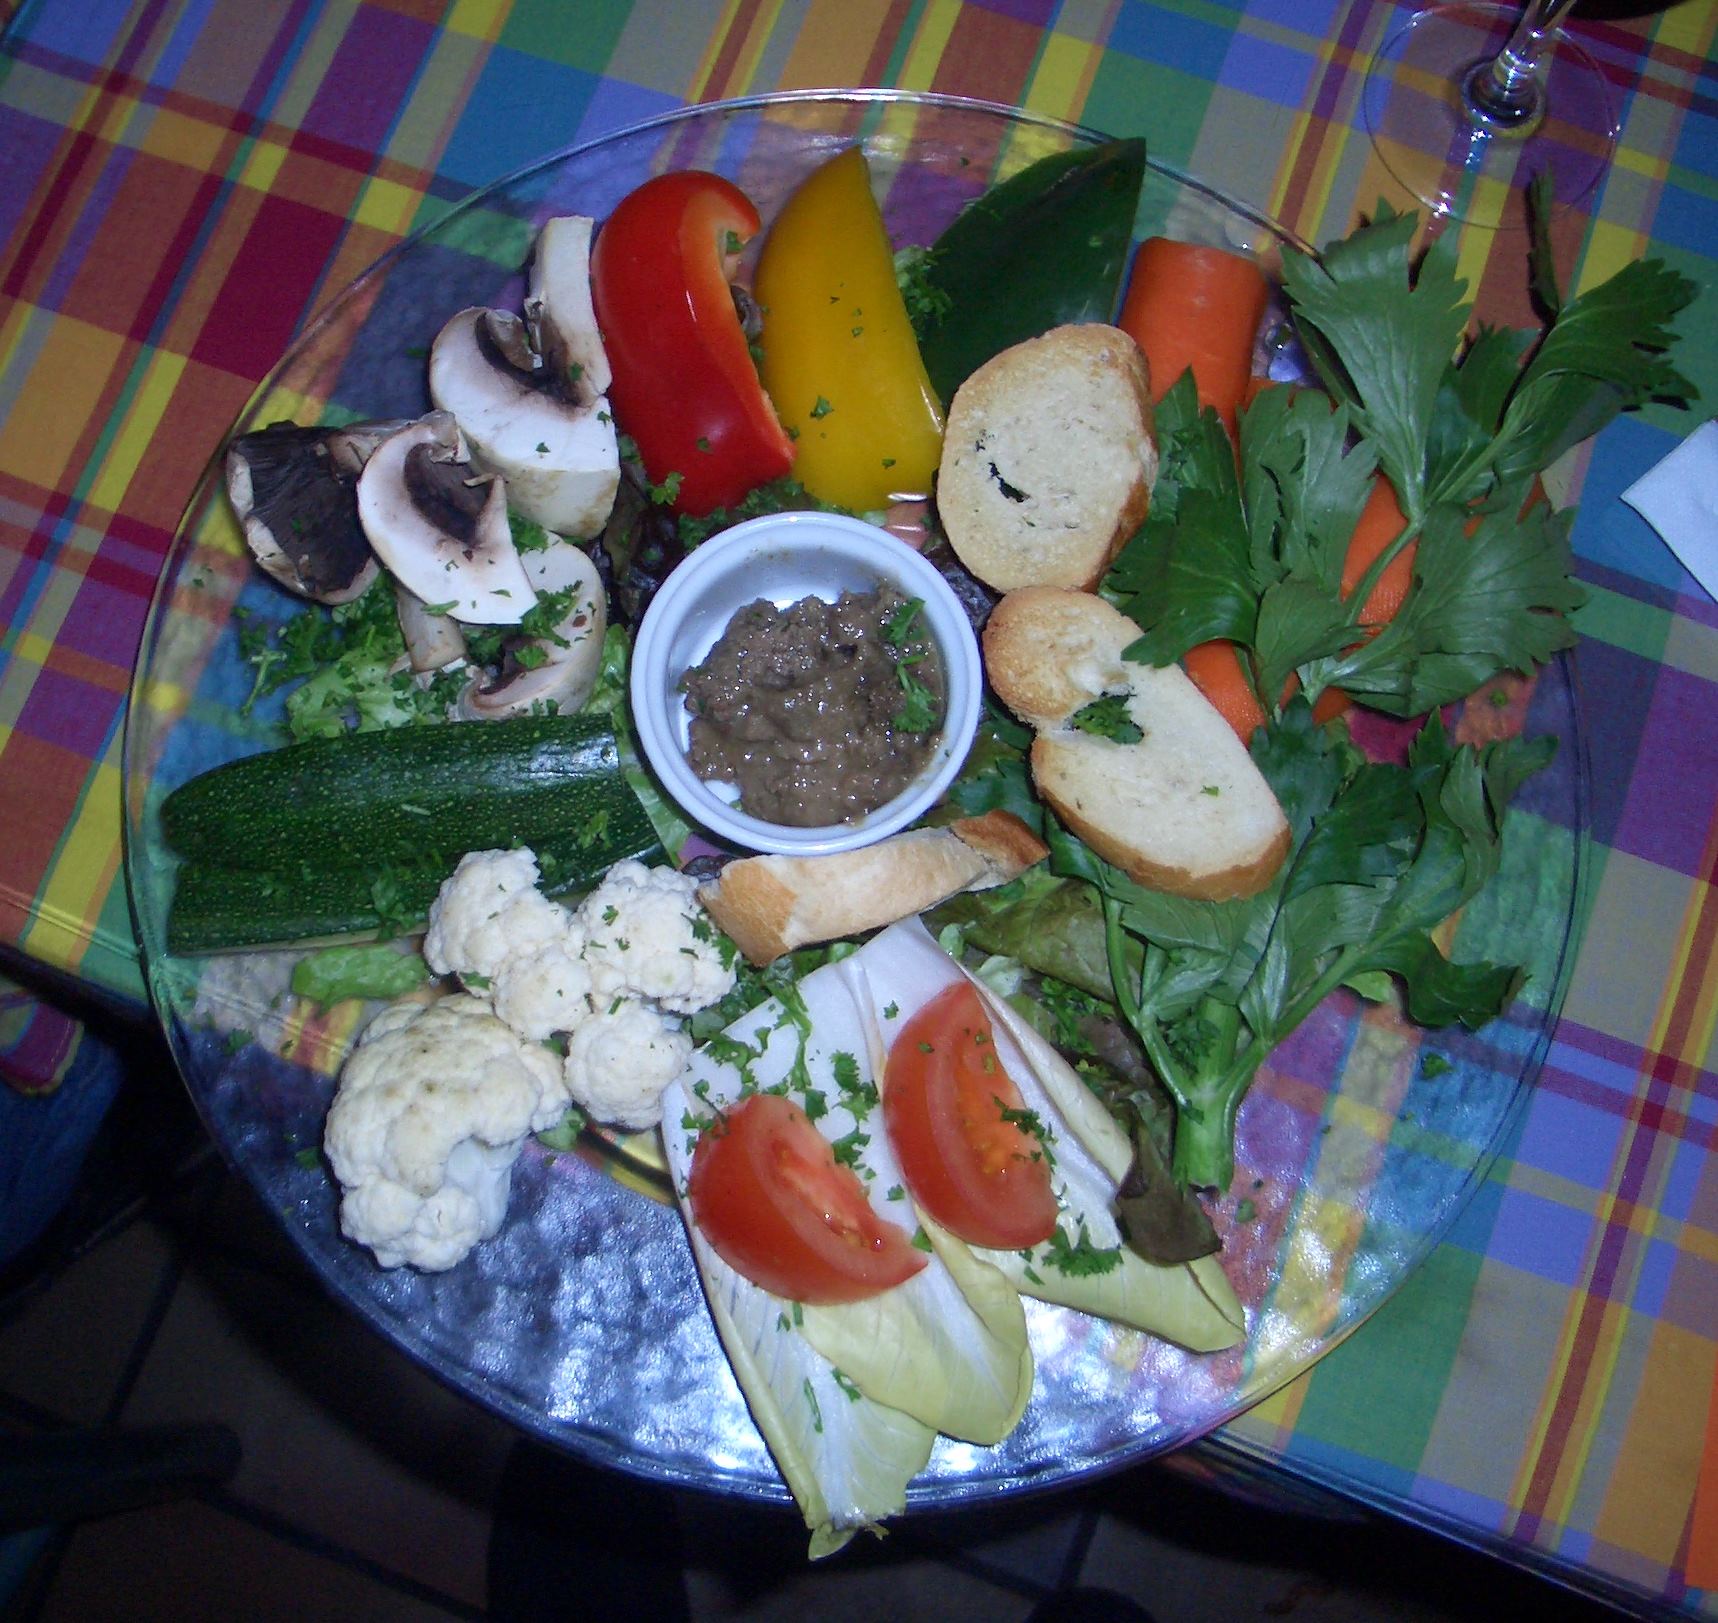 a plate full of food with various vegetables and food items